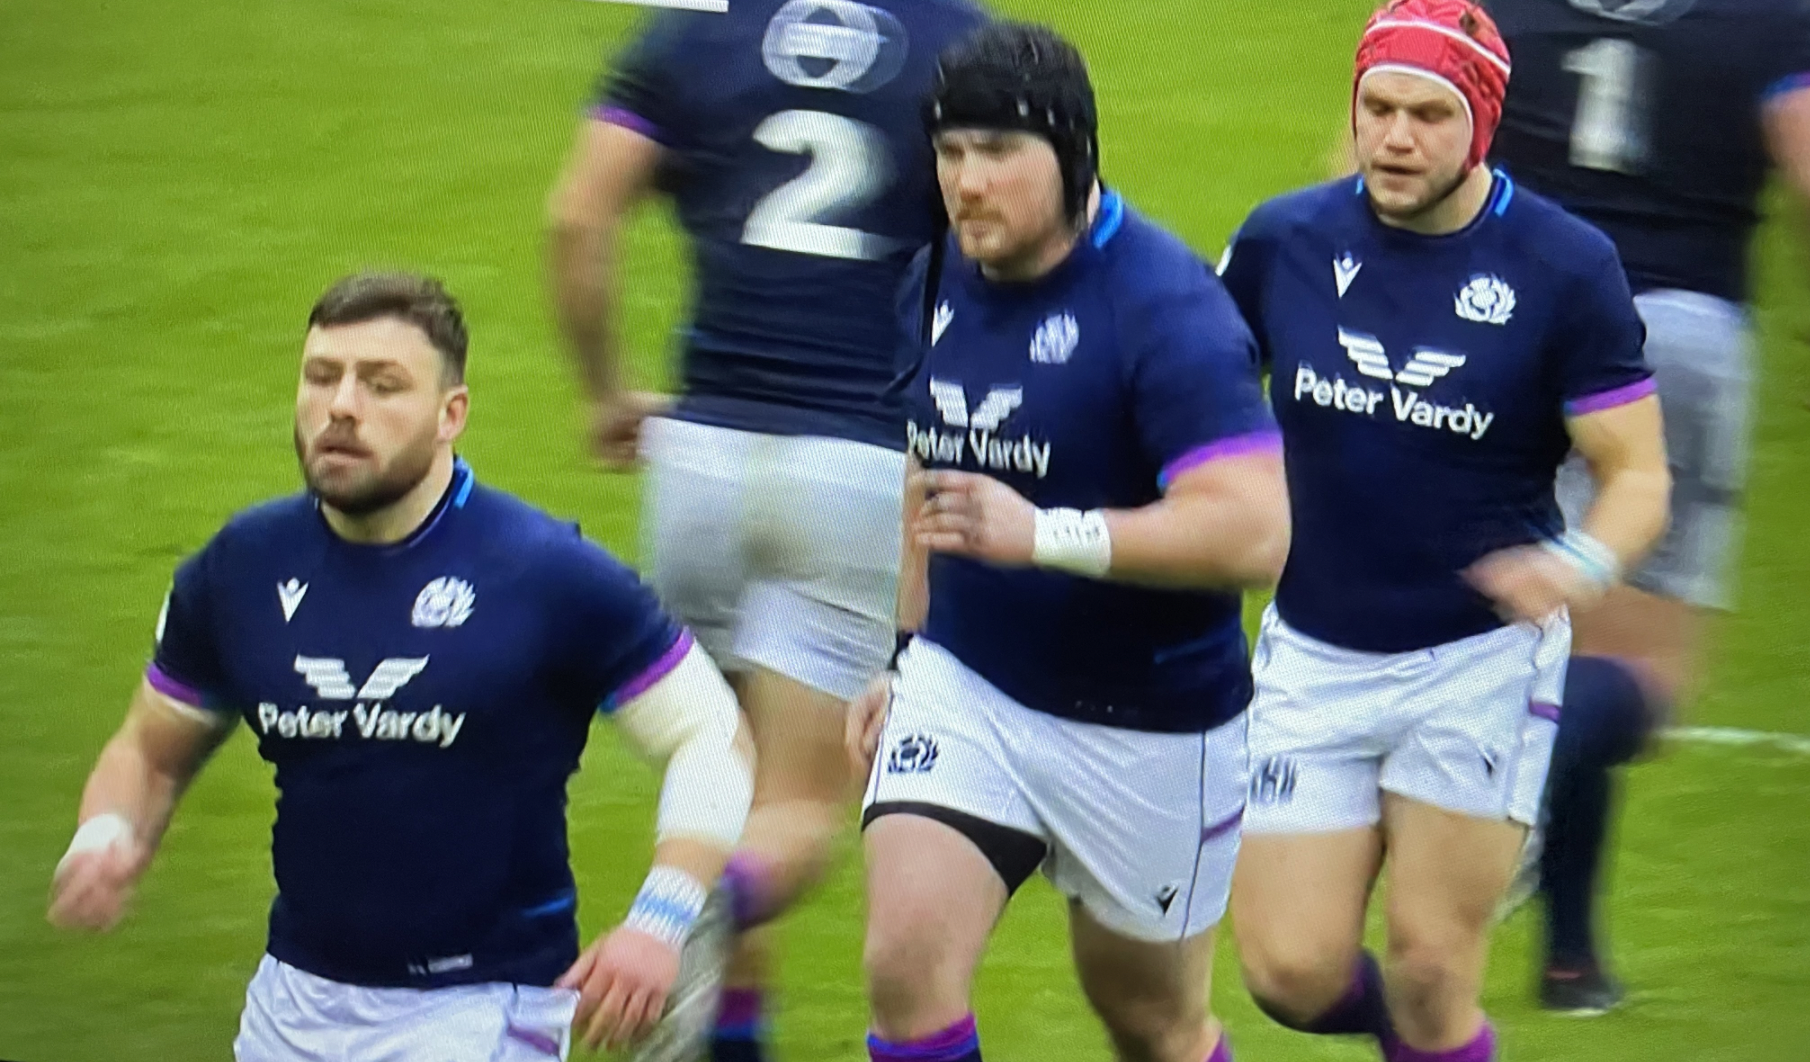 Scotland's hilarious answer to the Springboks' 'Bomb Squad' has already gone viral